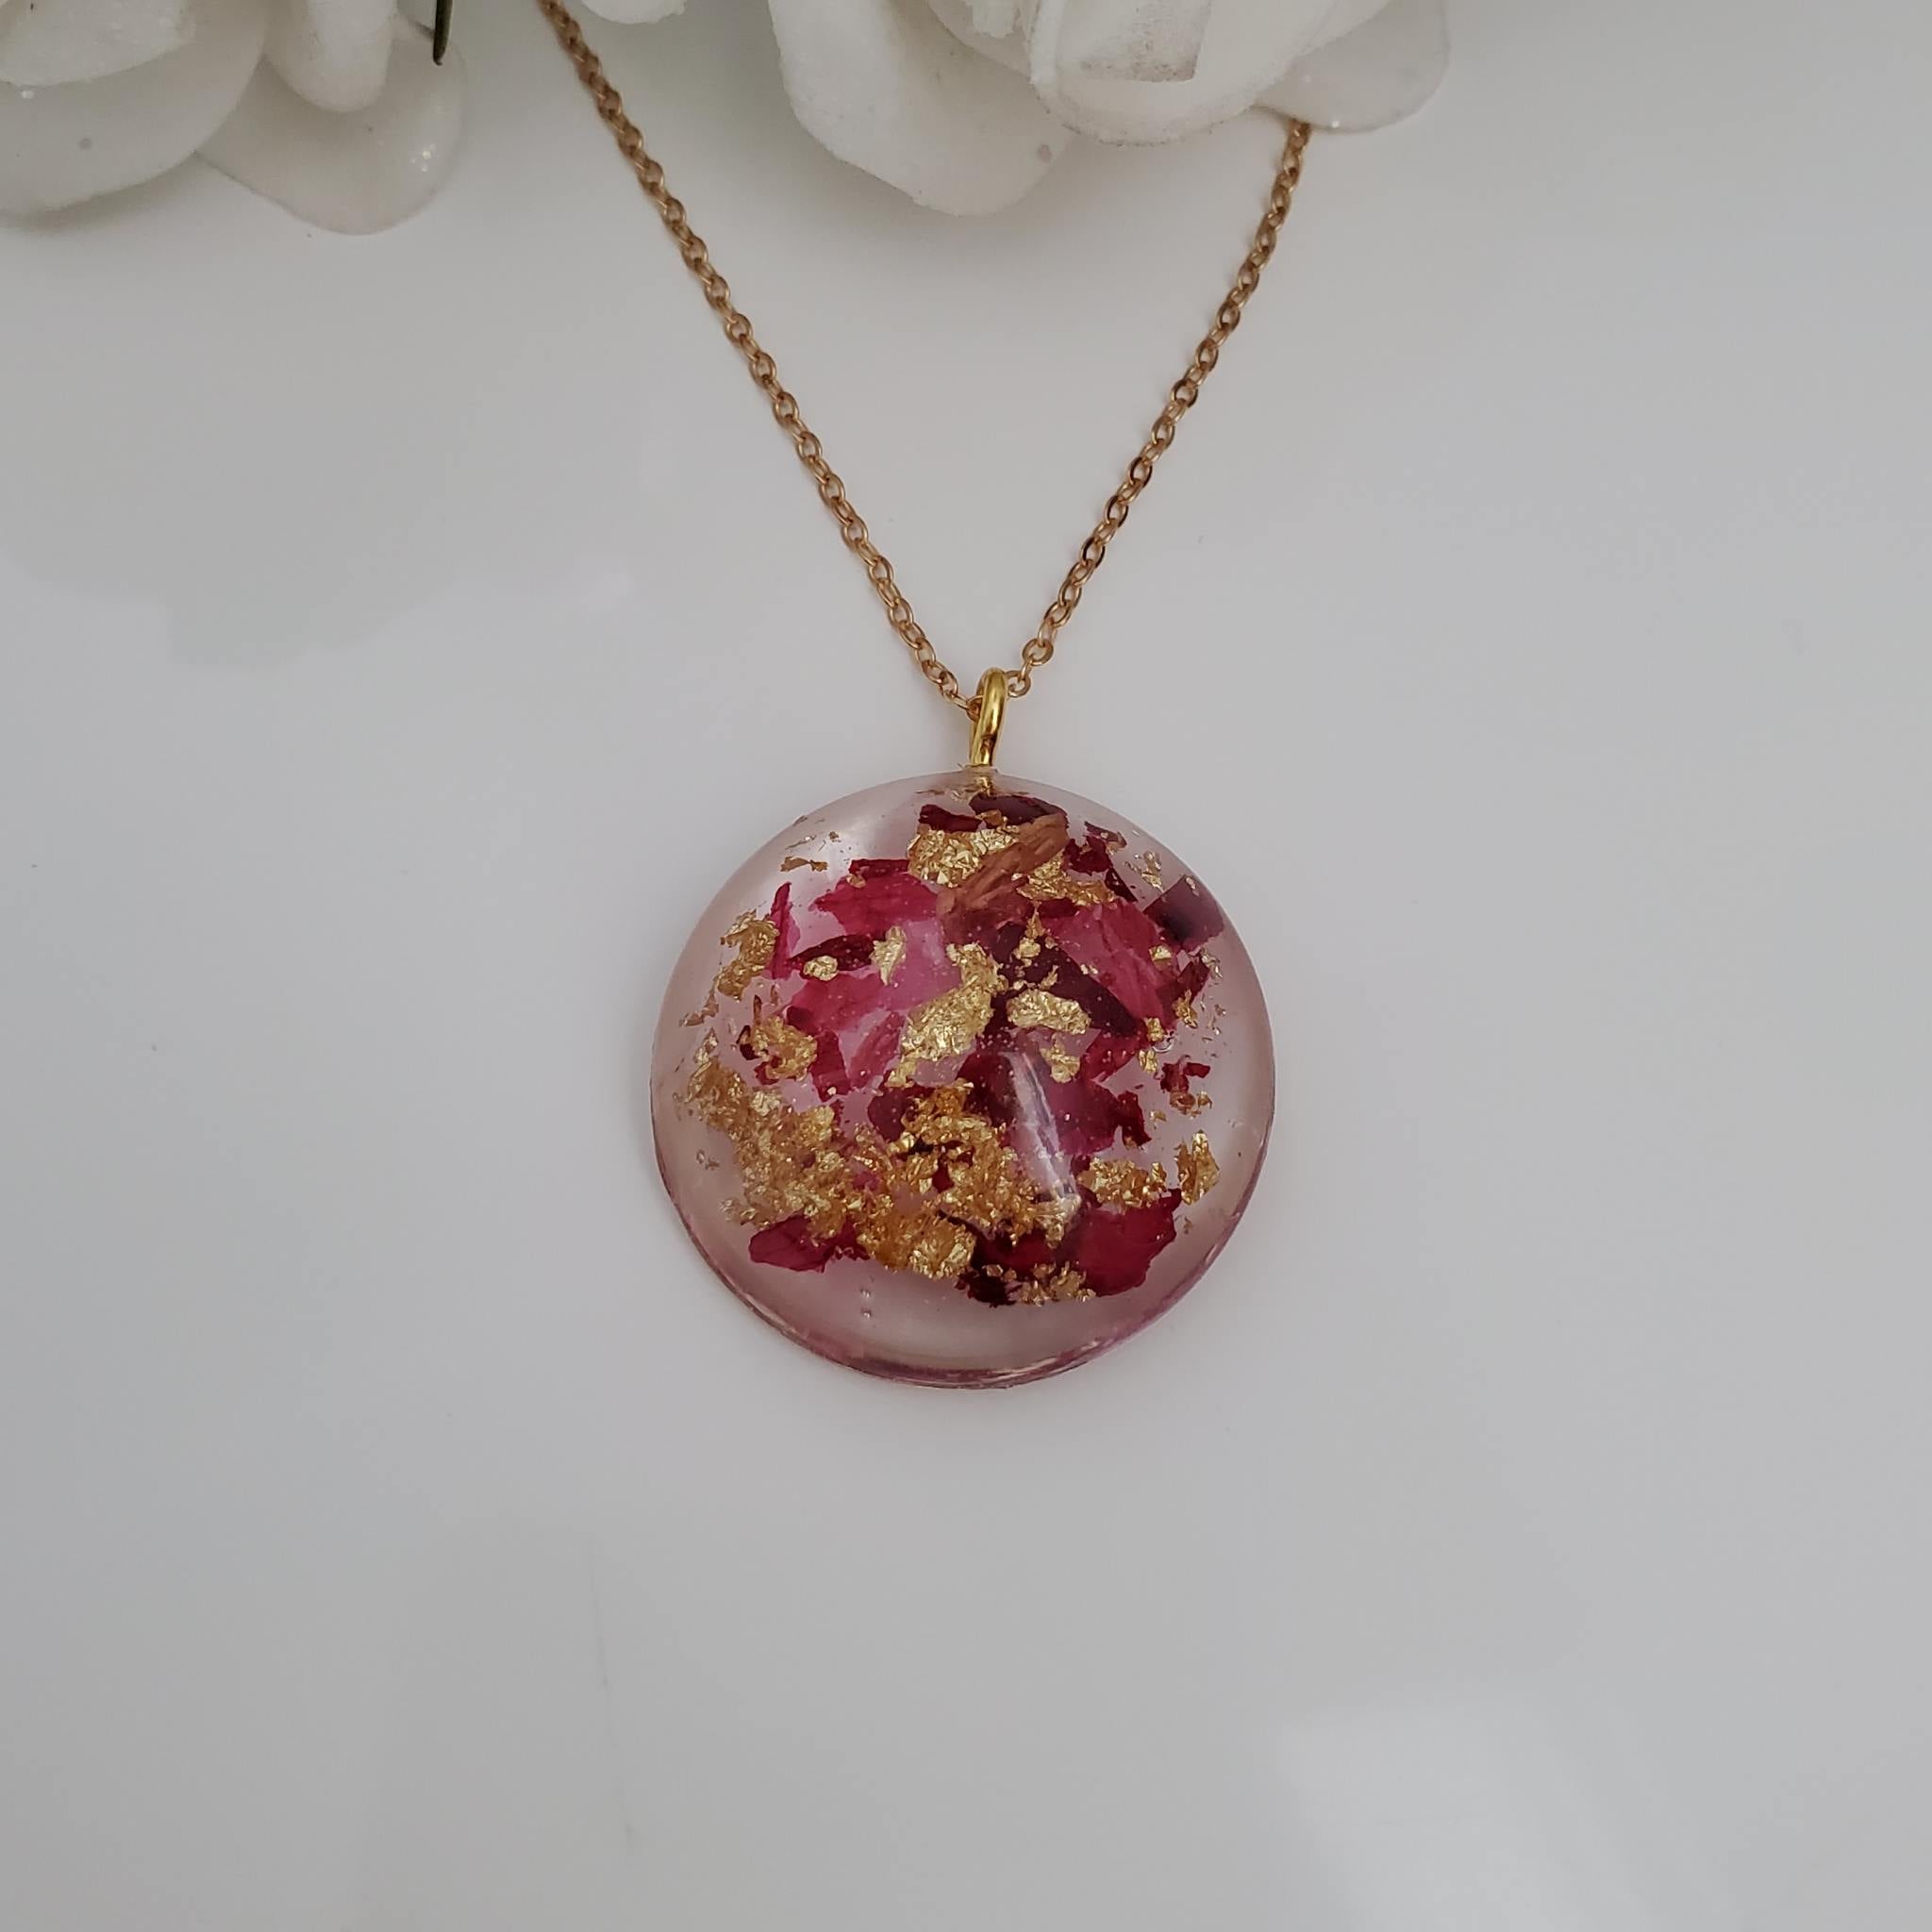 Handmade Jewelry, Pressed Flower Necklace, Heather Jewelry, Resin Pendant  Necklace - Etsy | Dried flower jewelry, Real flower jewelry, Plant jewelry